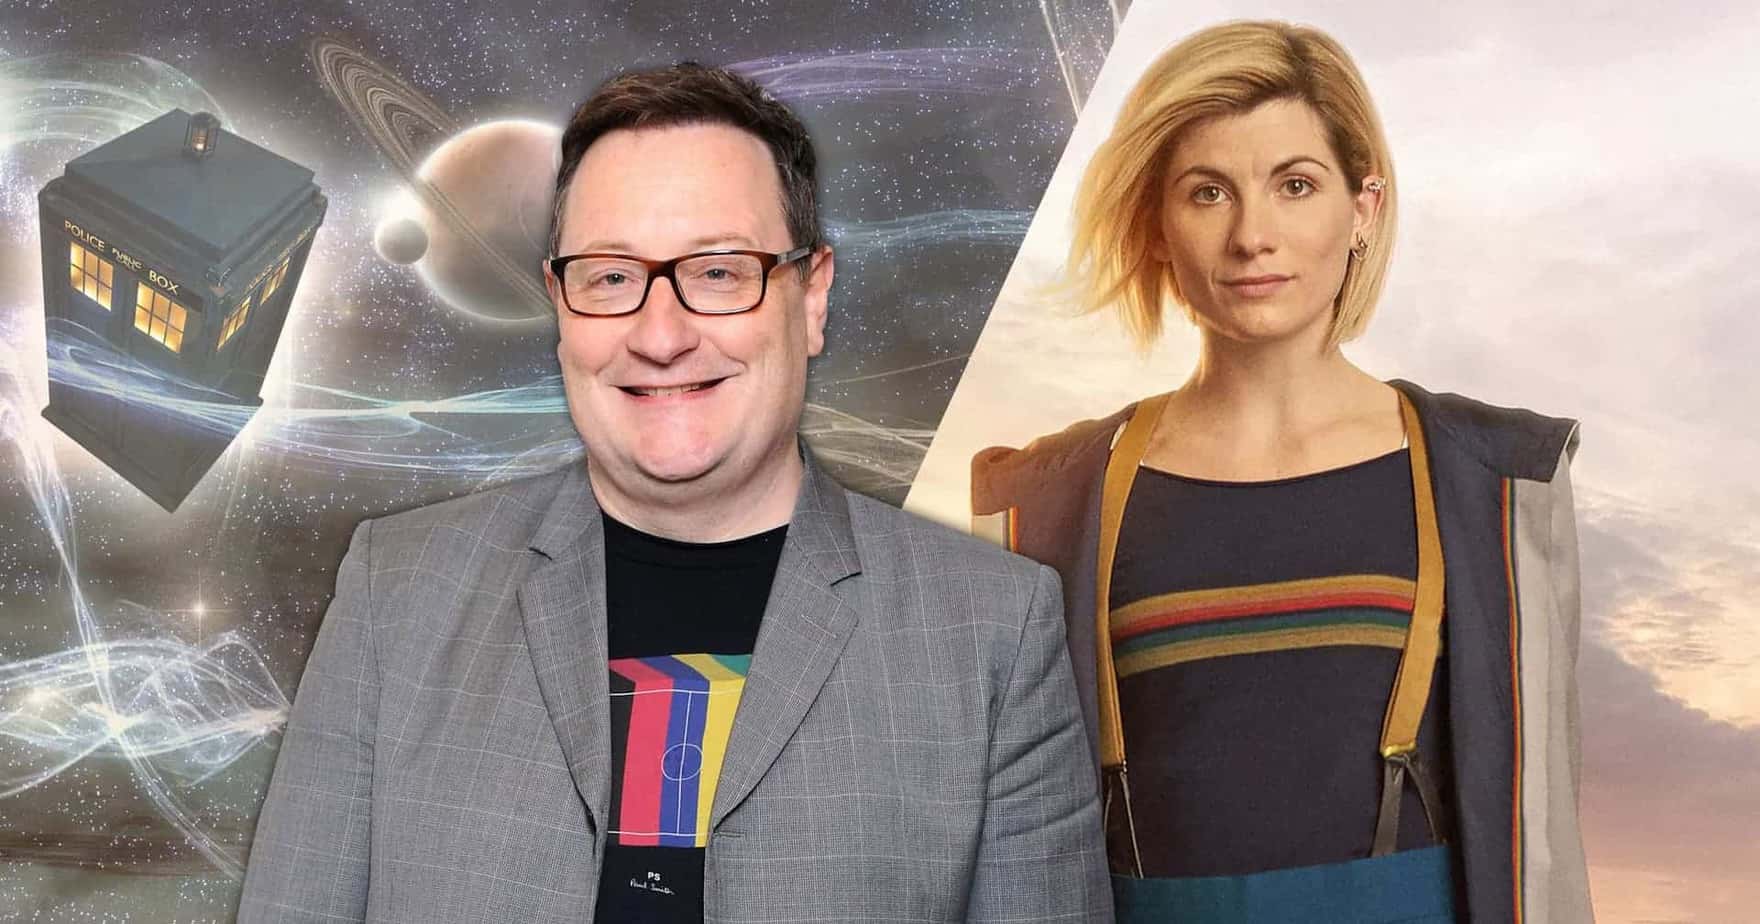 Jodie Whittaker and Chris Chibnall